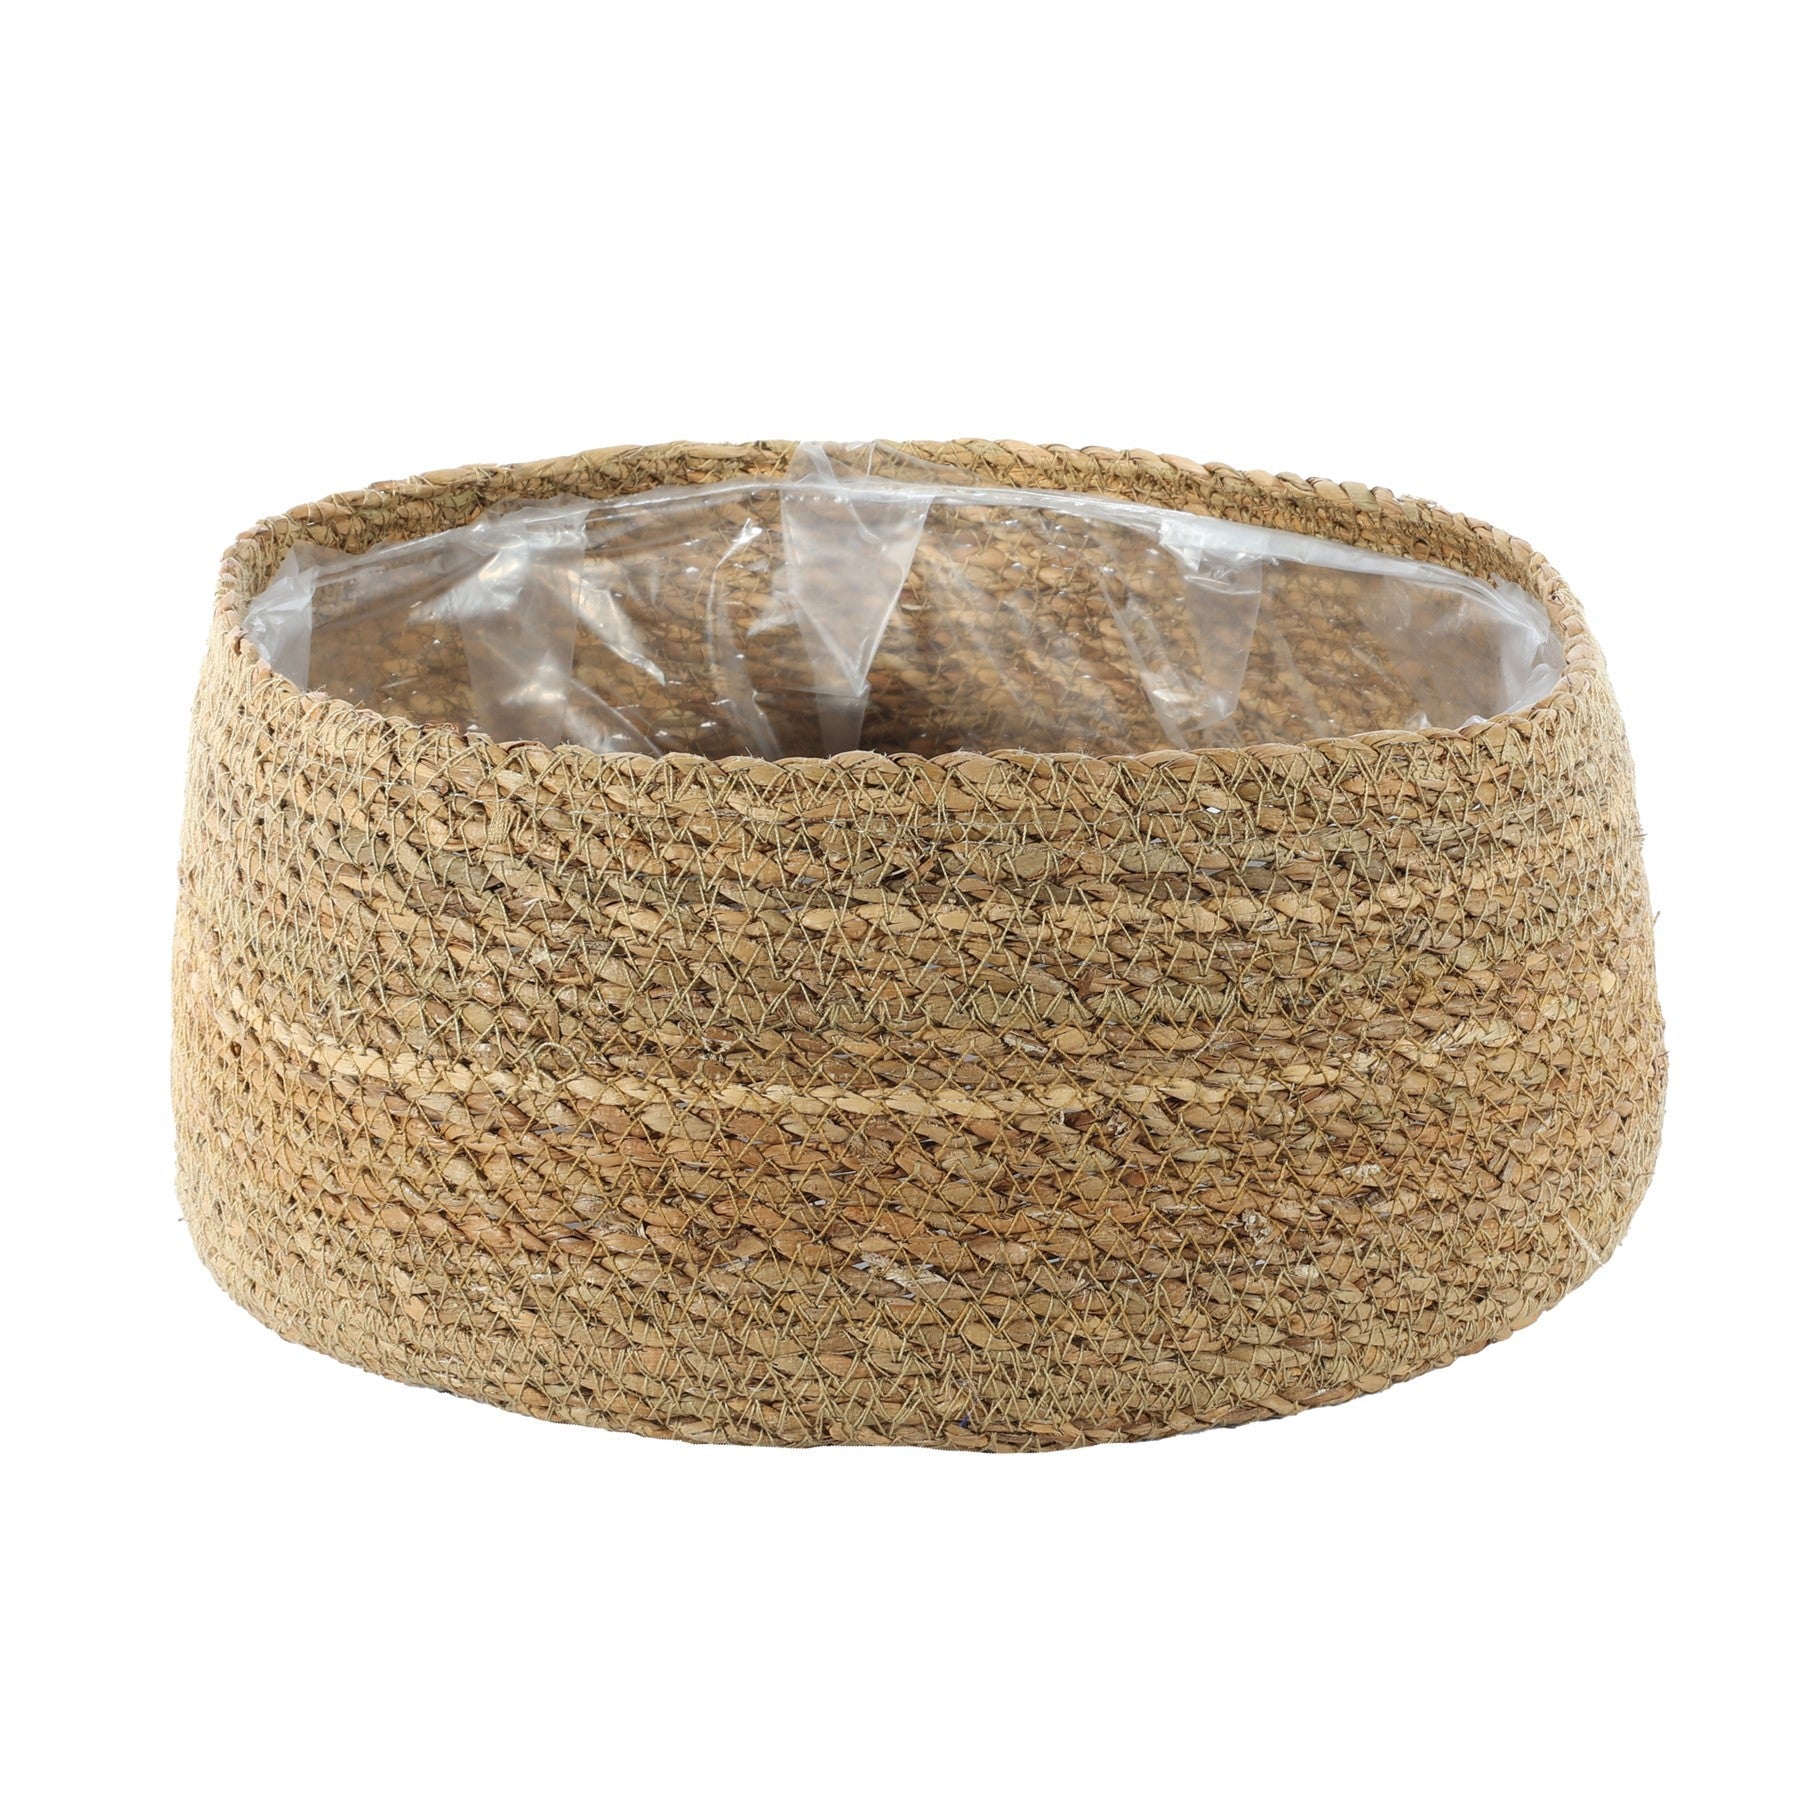 View Natural Seagrass Shallow Basket H11cm x 25cm information